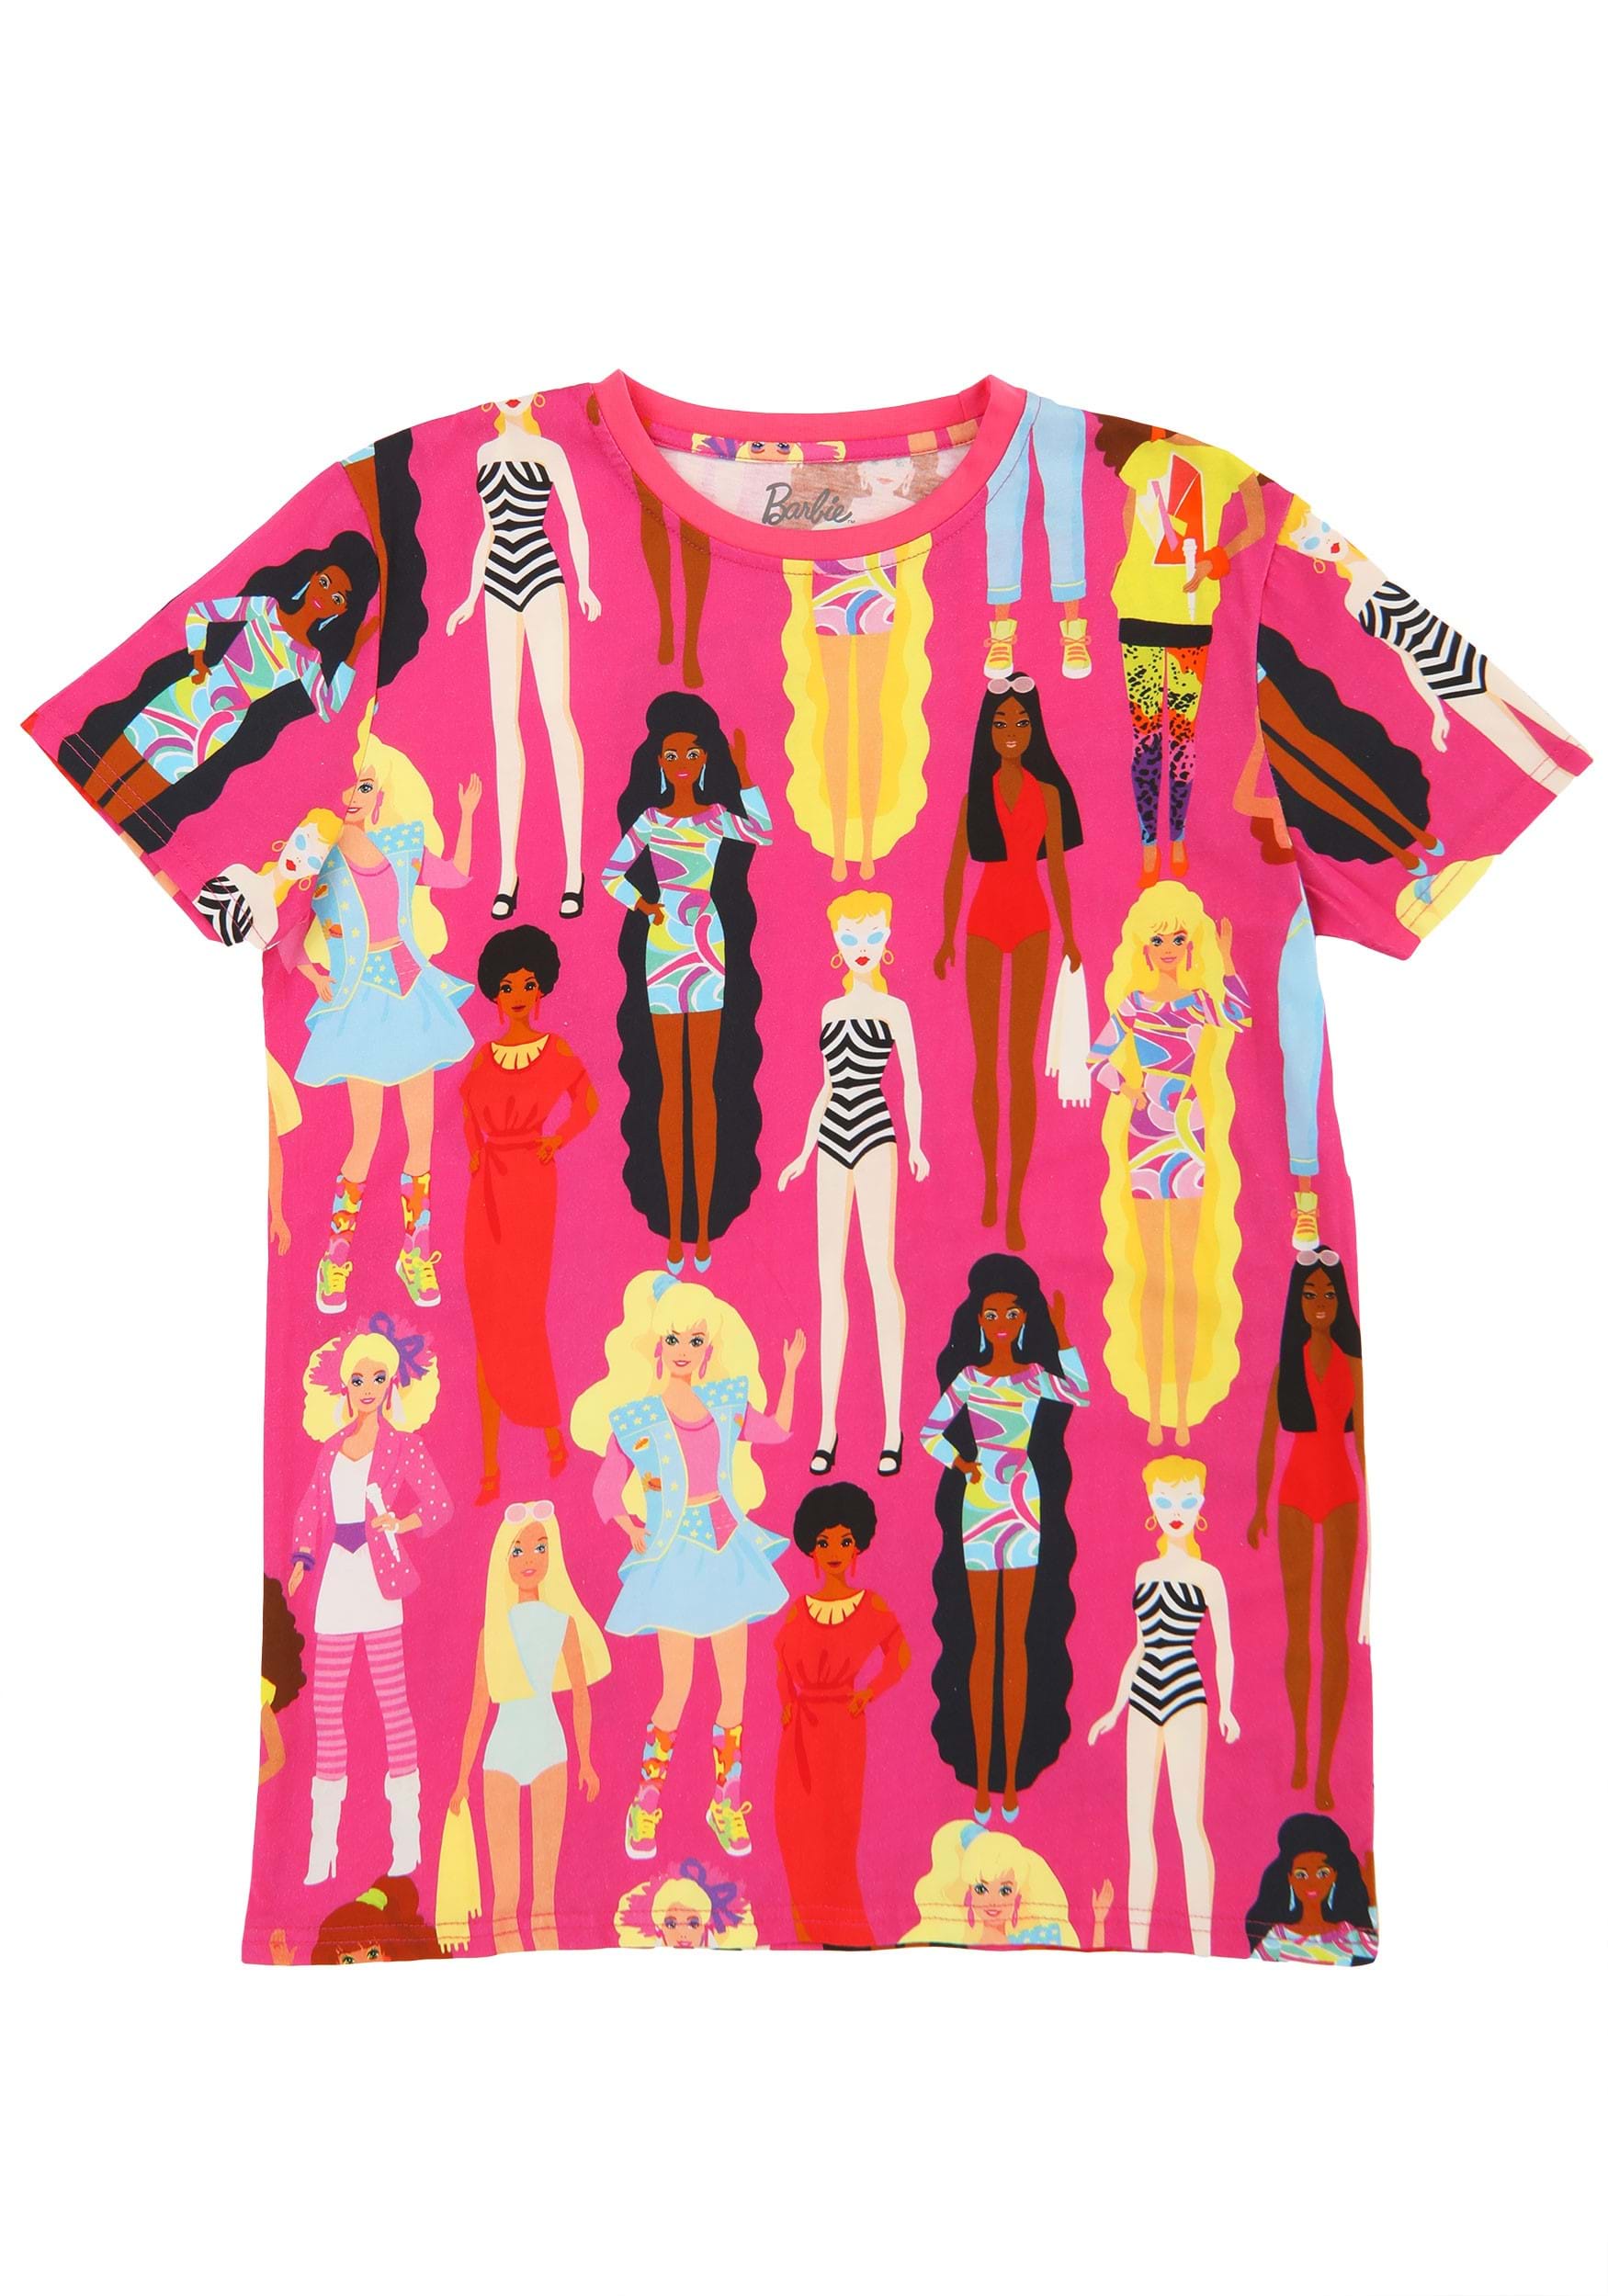 Adult Cakeworthy Barbie All Over Print Shirt